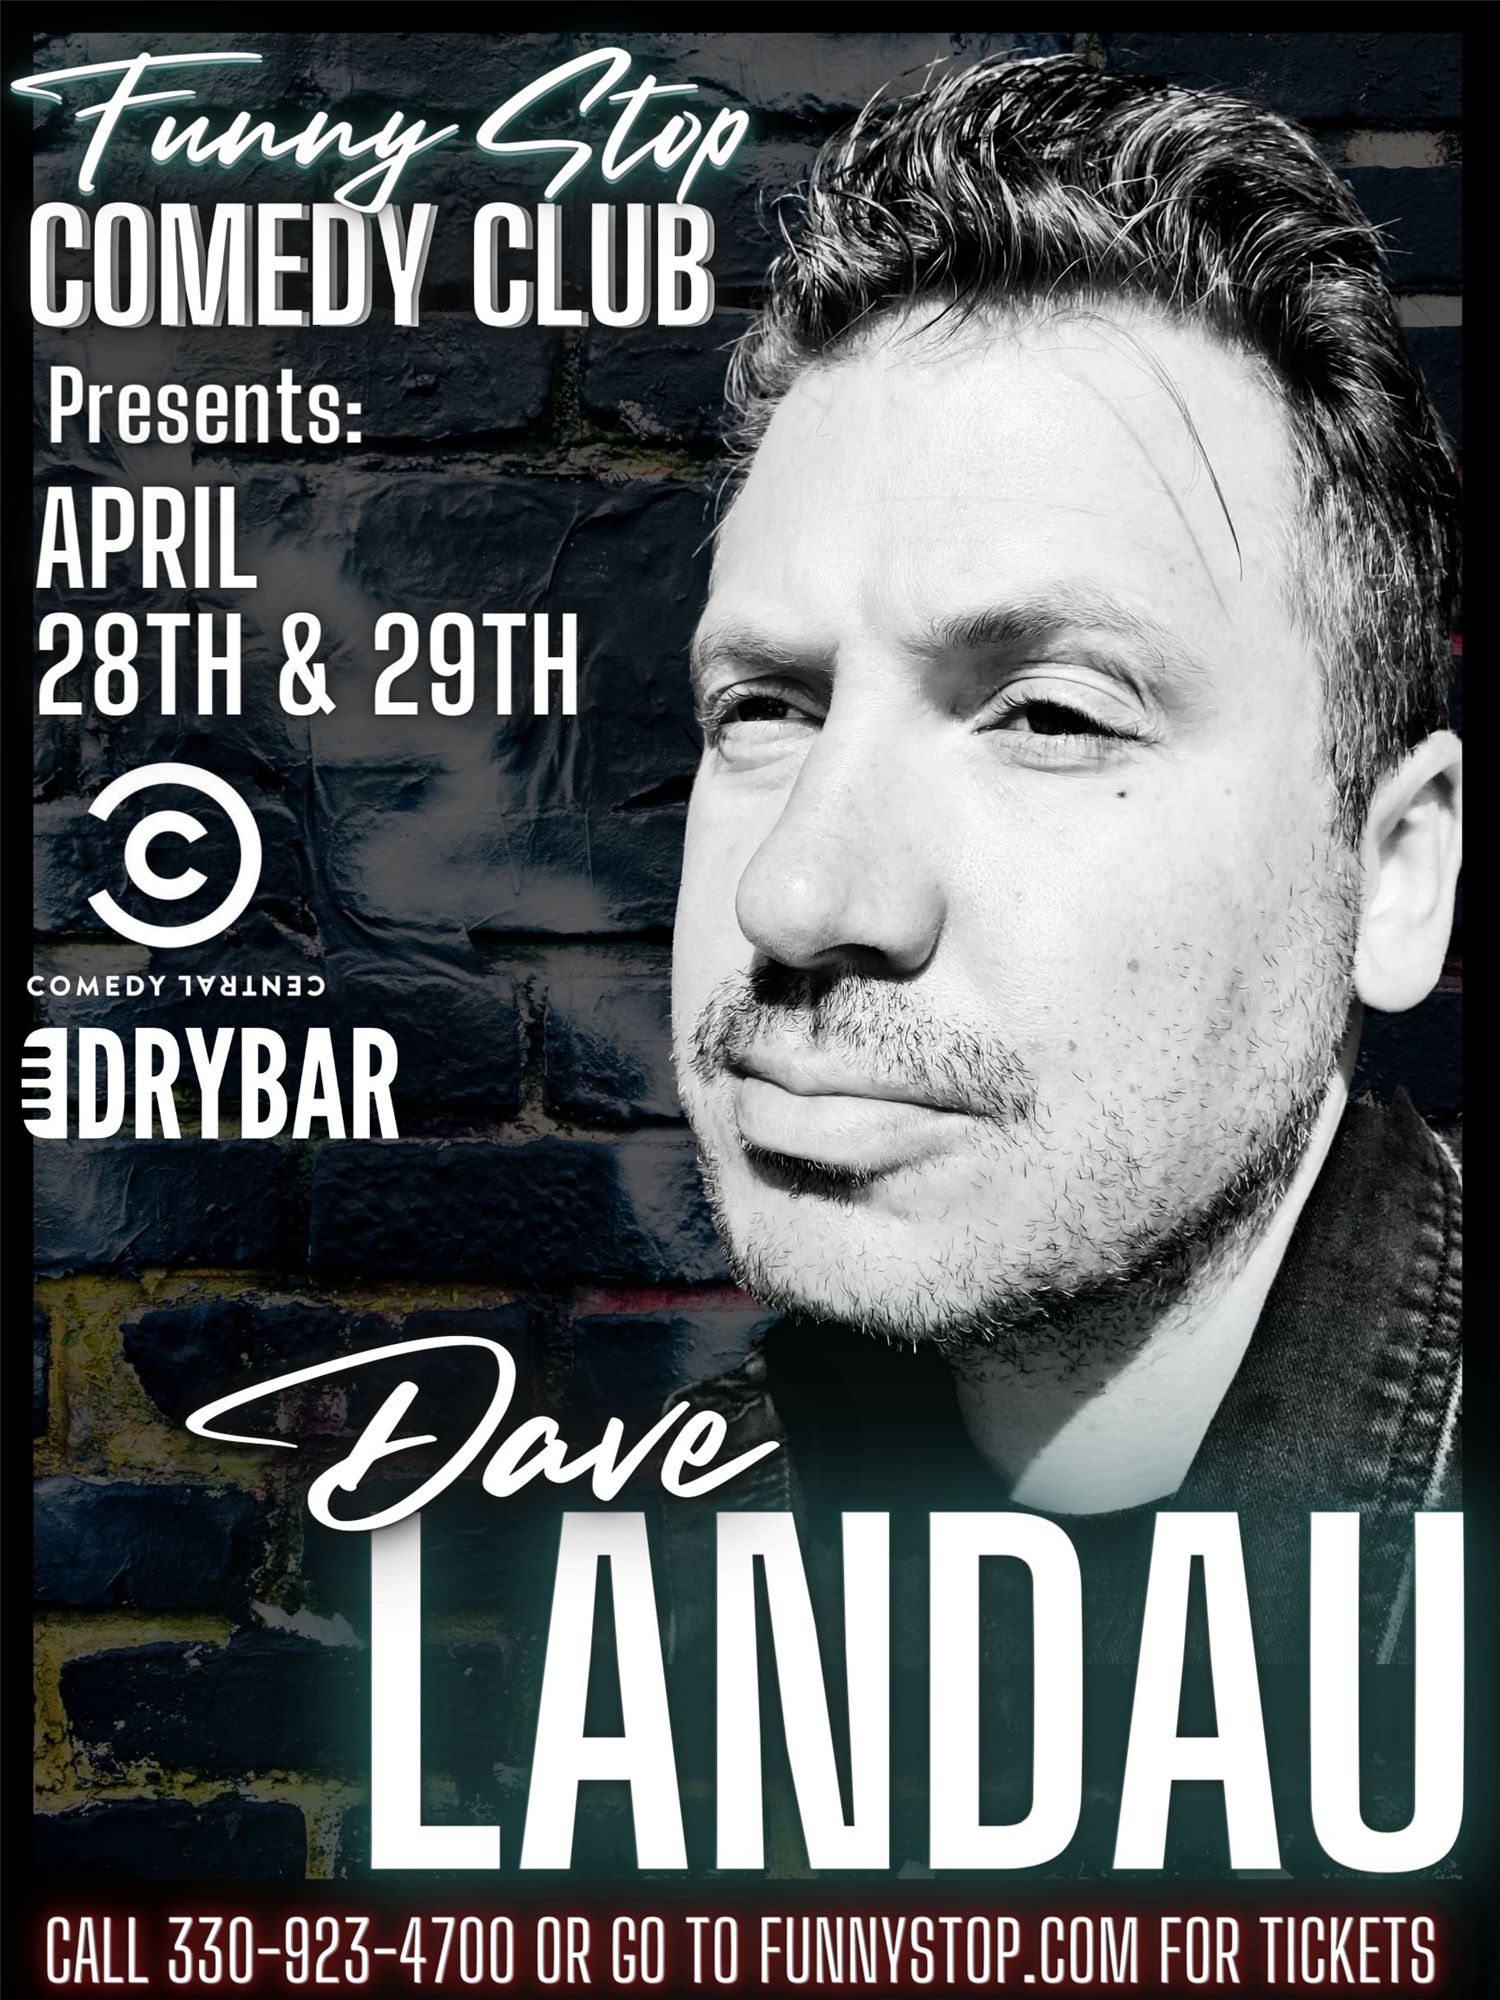 Dave Landau Fri. 7:30 Show Funny Stop Comedy Club on Apr 28, 19:30@Funny Stop Comedy Club - Buy tickets and Get information on Funny Stop funnystop.online